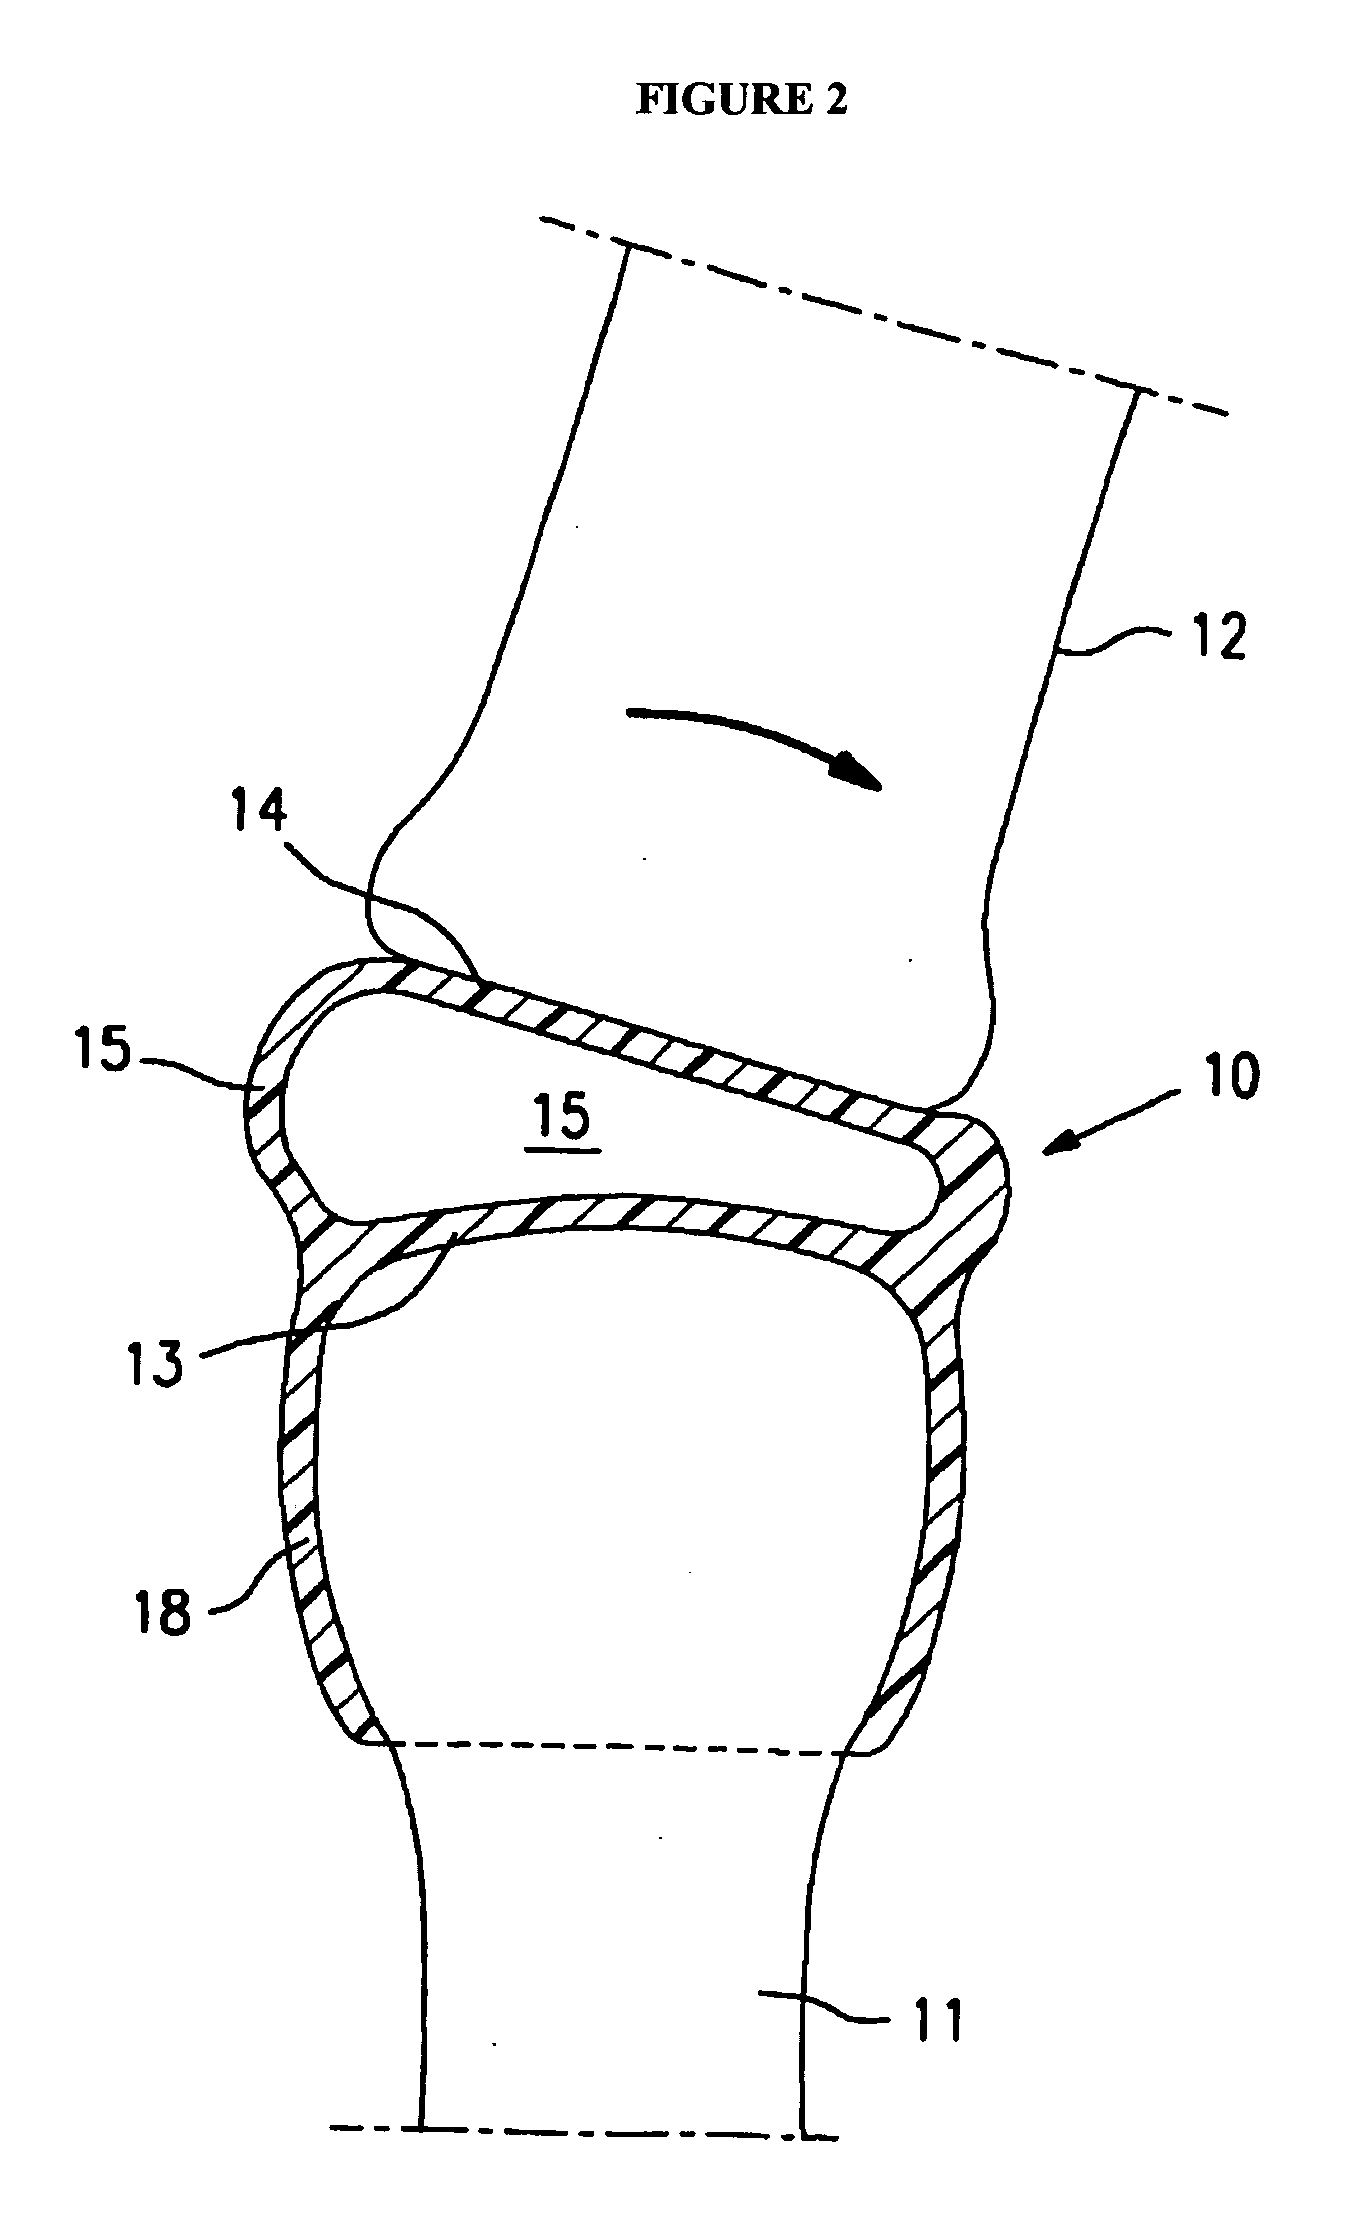 Resilient medically inflatable interpositional arthroplasty device